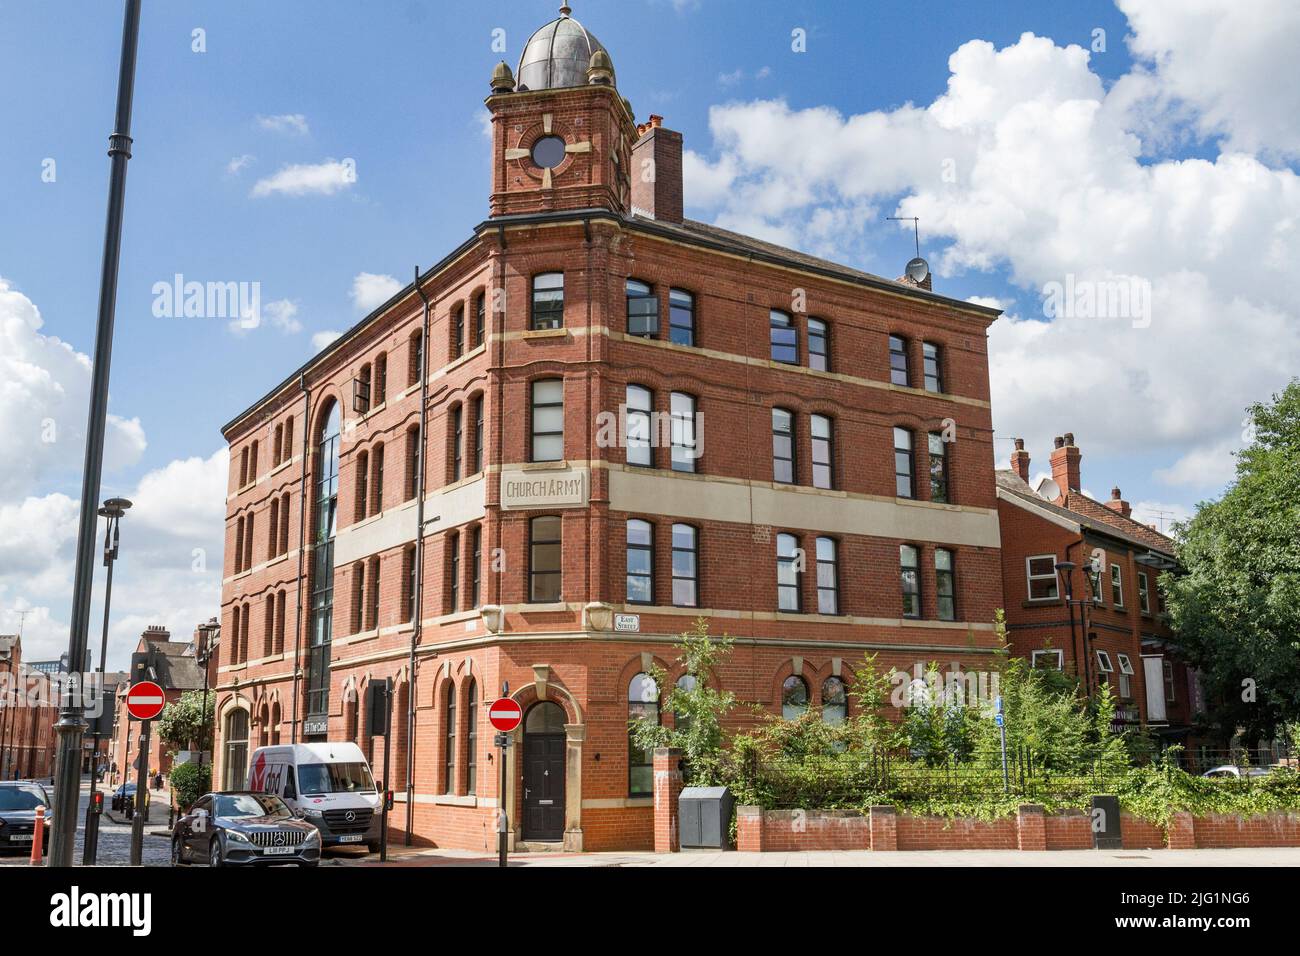 The former Church Army lodging house on The Calls/East Street in Leeds city centre, West Yorkshire, UK. Stock Photo